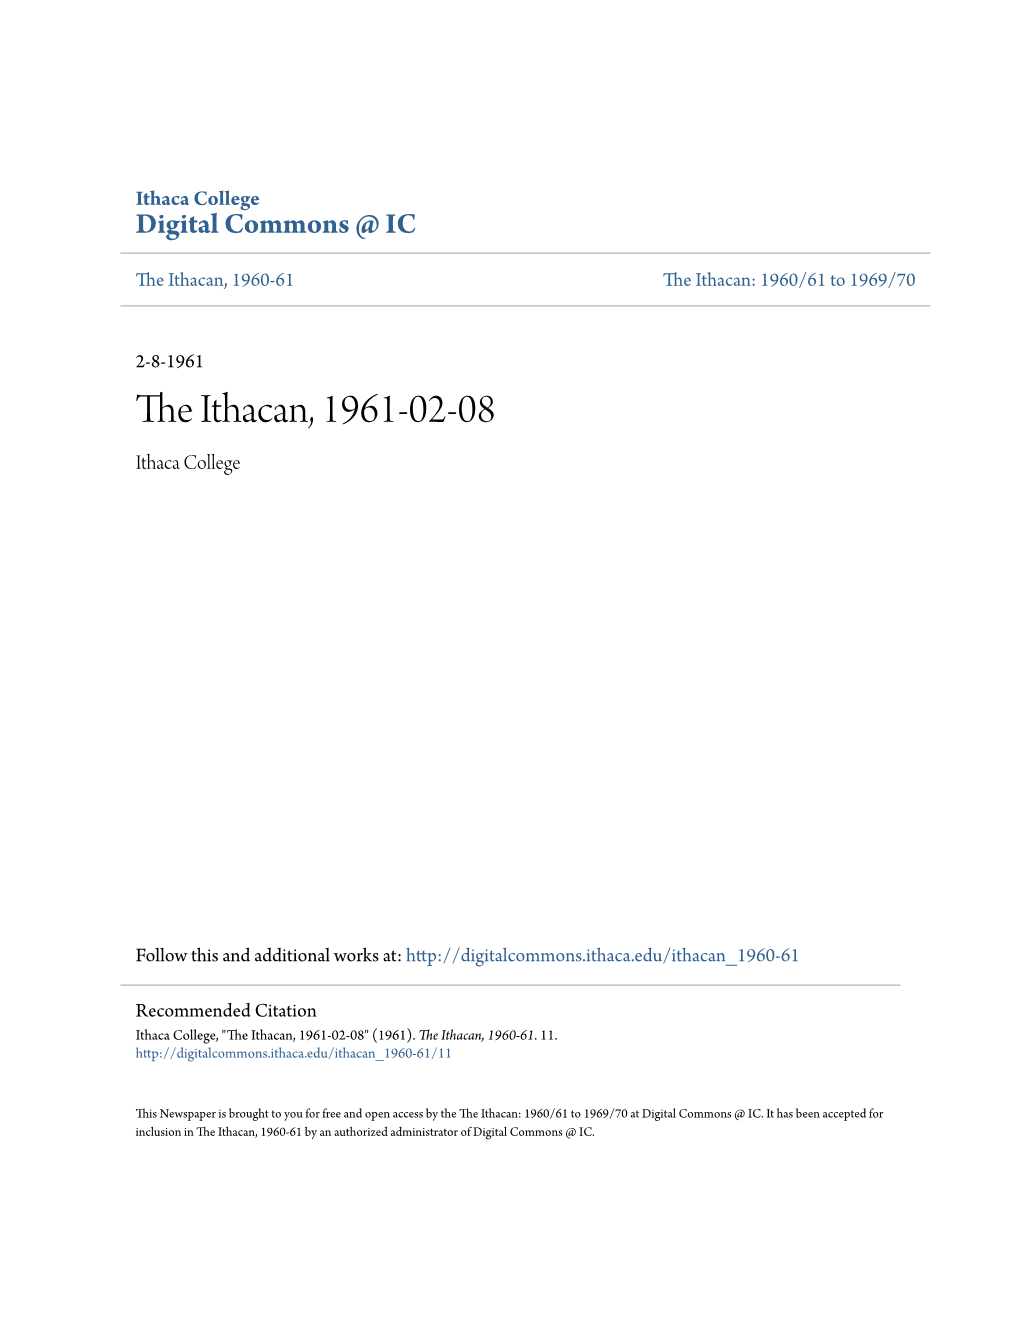 The Ithacan, 1961-02-08